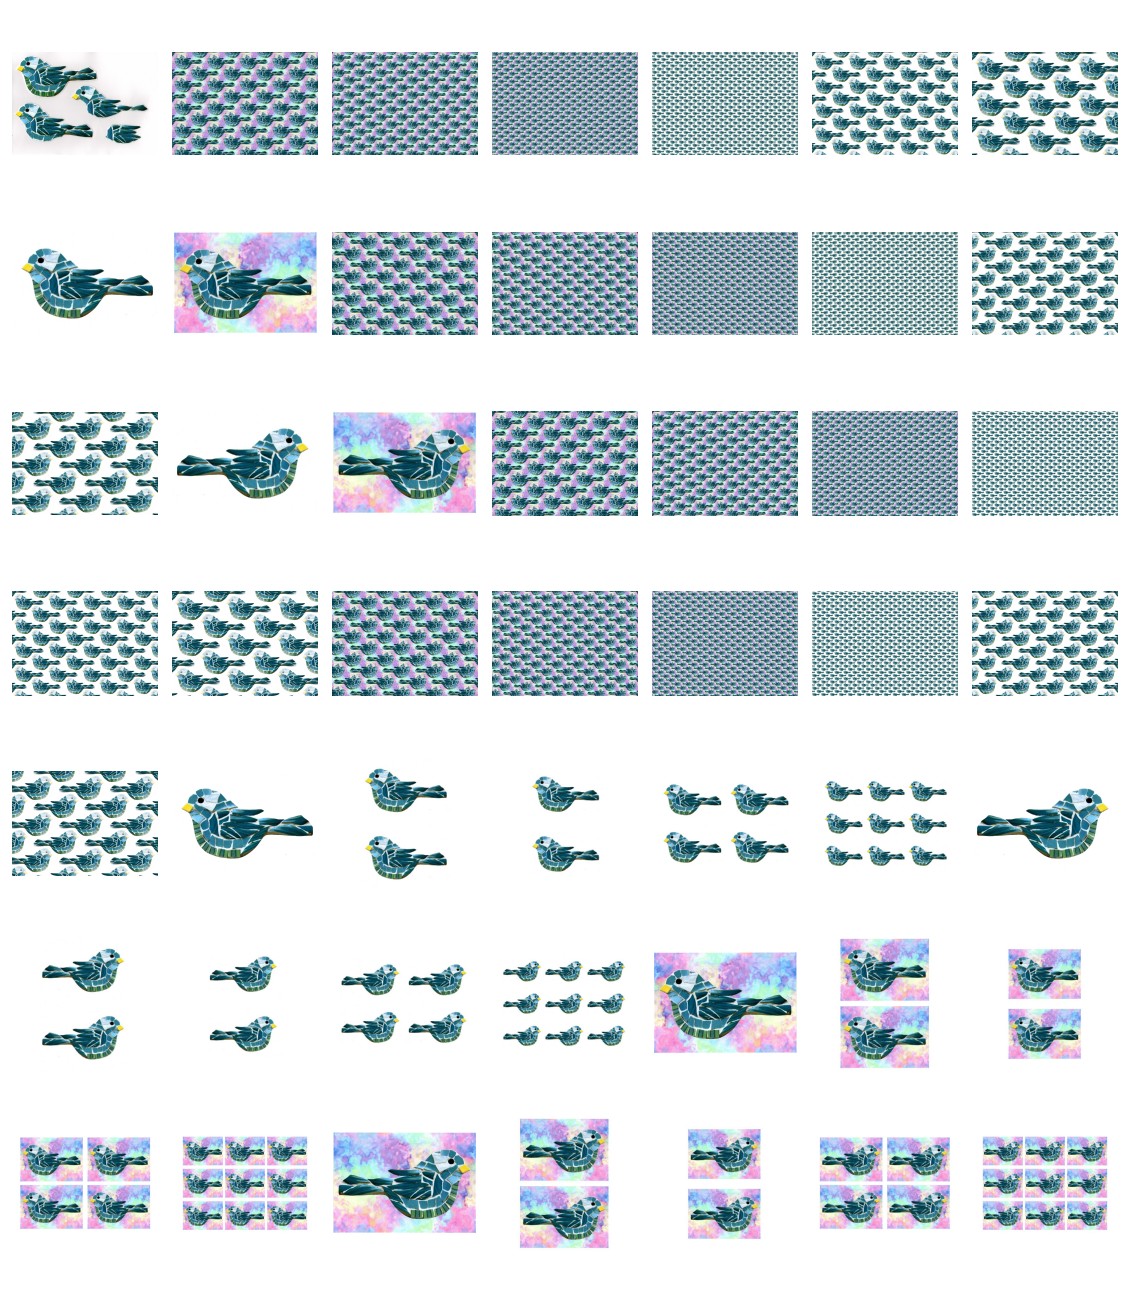 Tiled Effect Birds - Set 09 - 48 Pages to Download